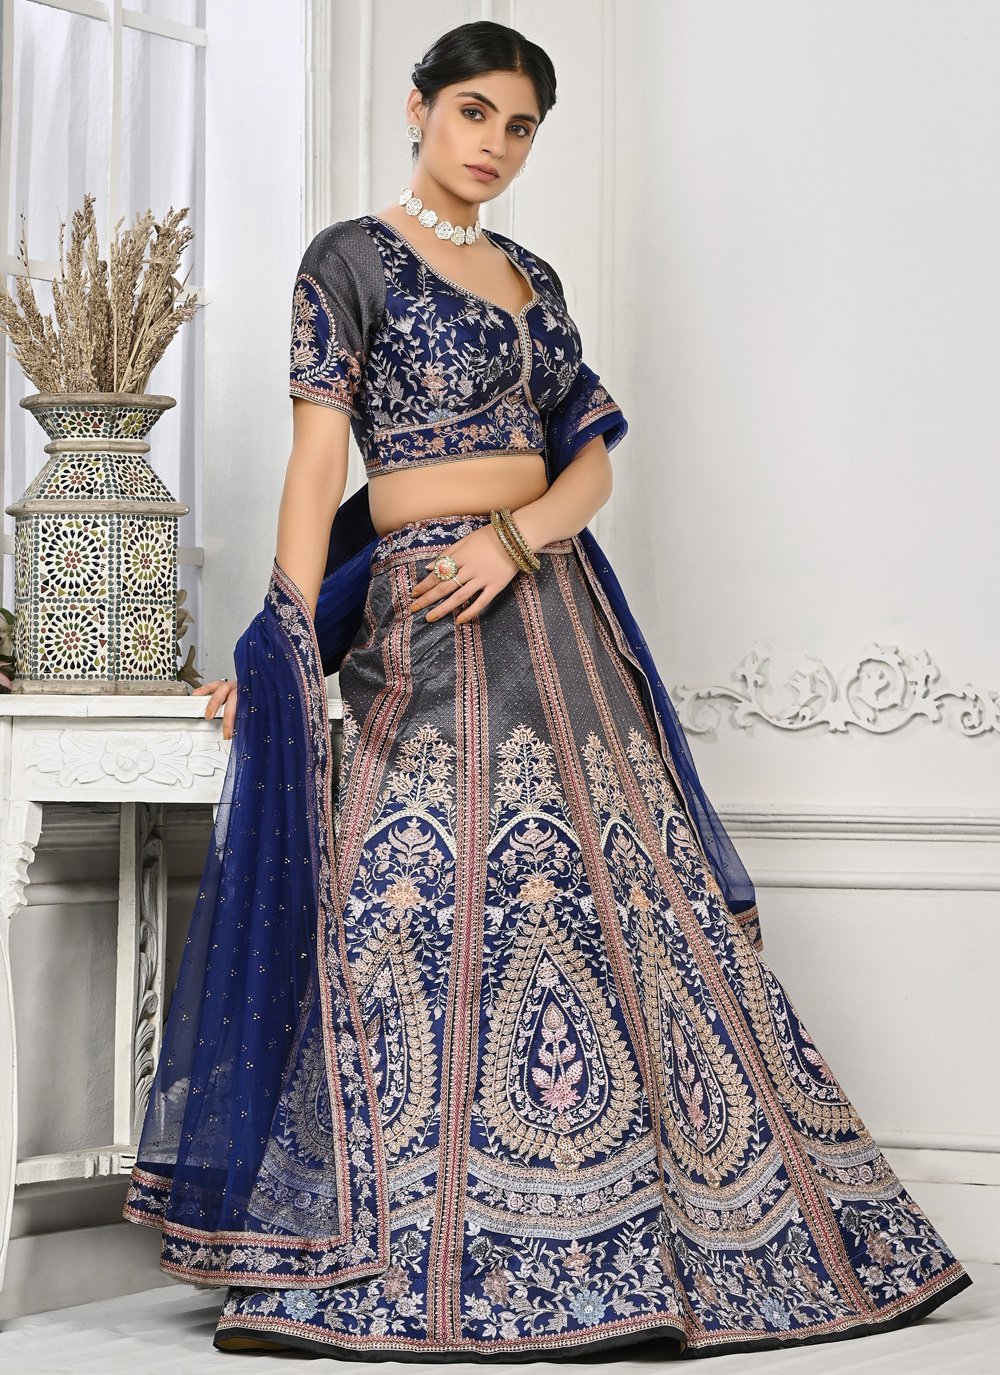 engagement look for bride in lehenga – Page 22 – Joshindia